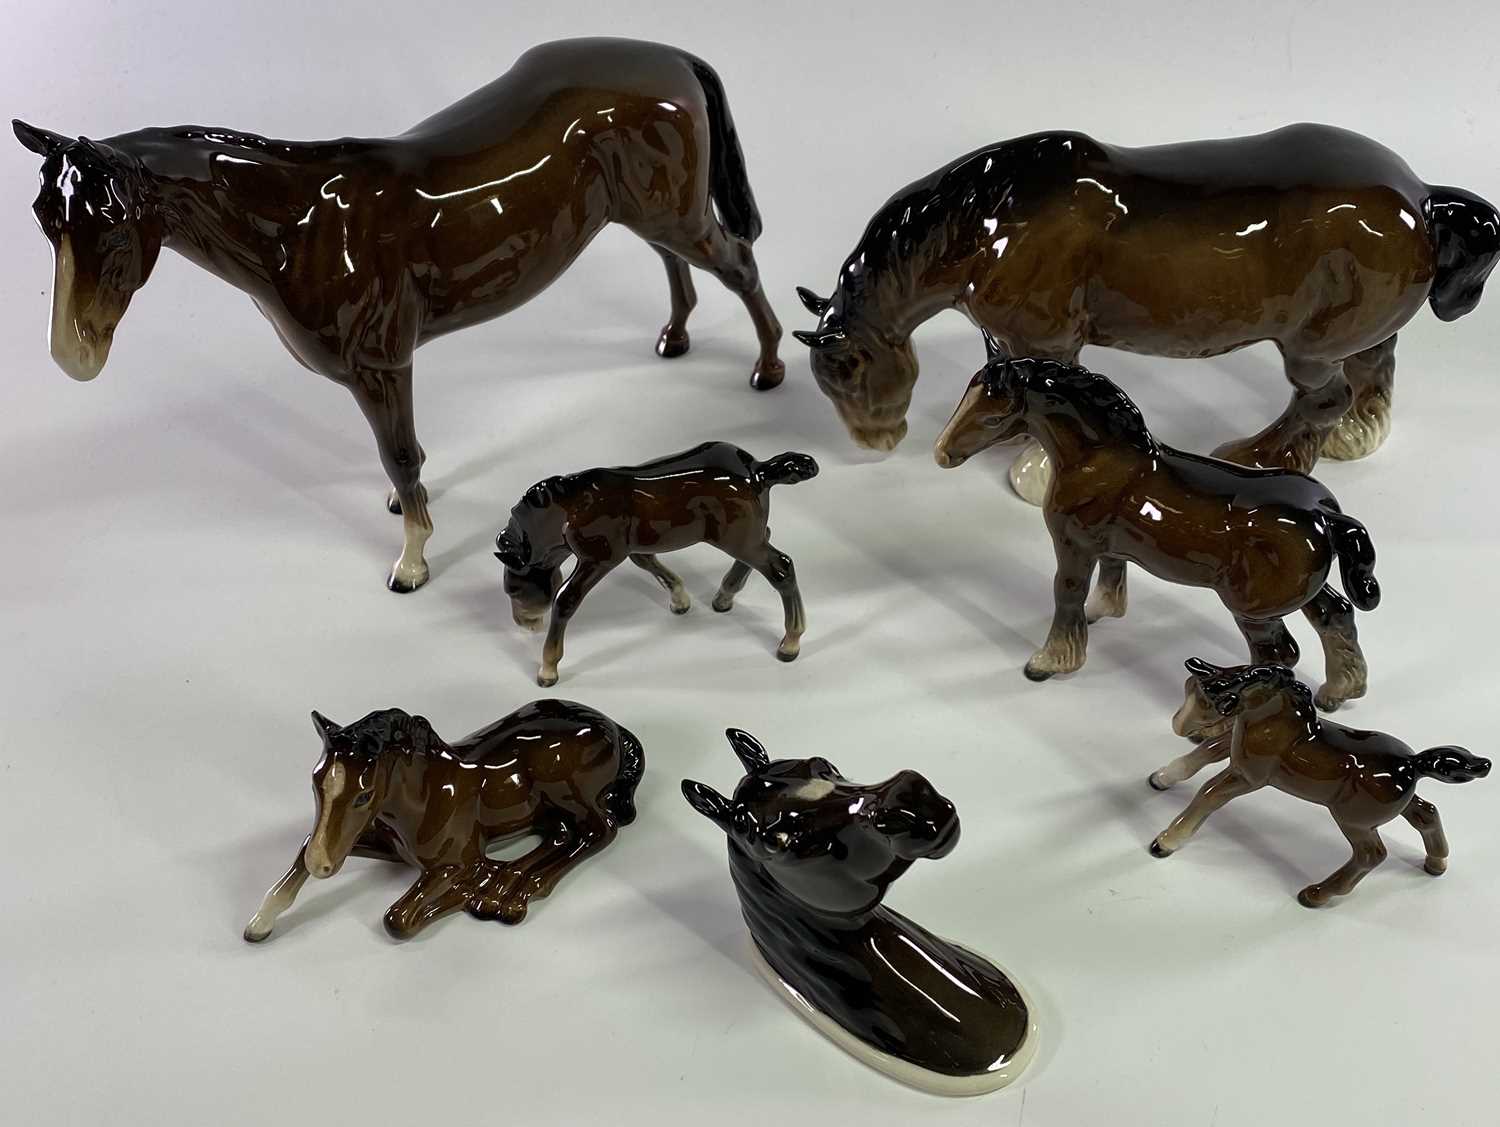 BESWICK, BORDER FINE ARTS and other collectables group to include 7 Beswick horse ornaments, 20cms H - Image 2 of 5